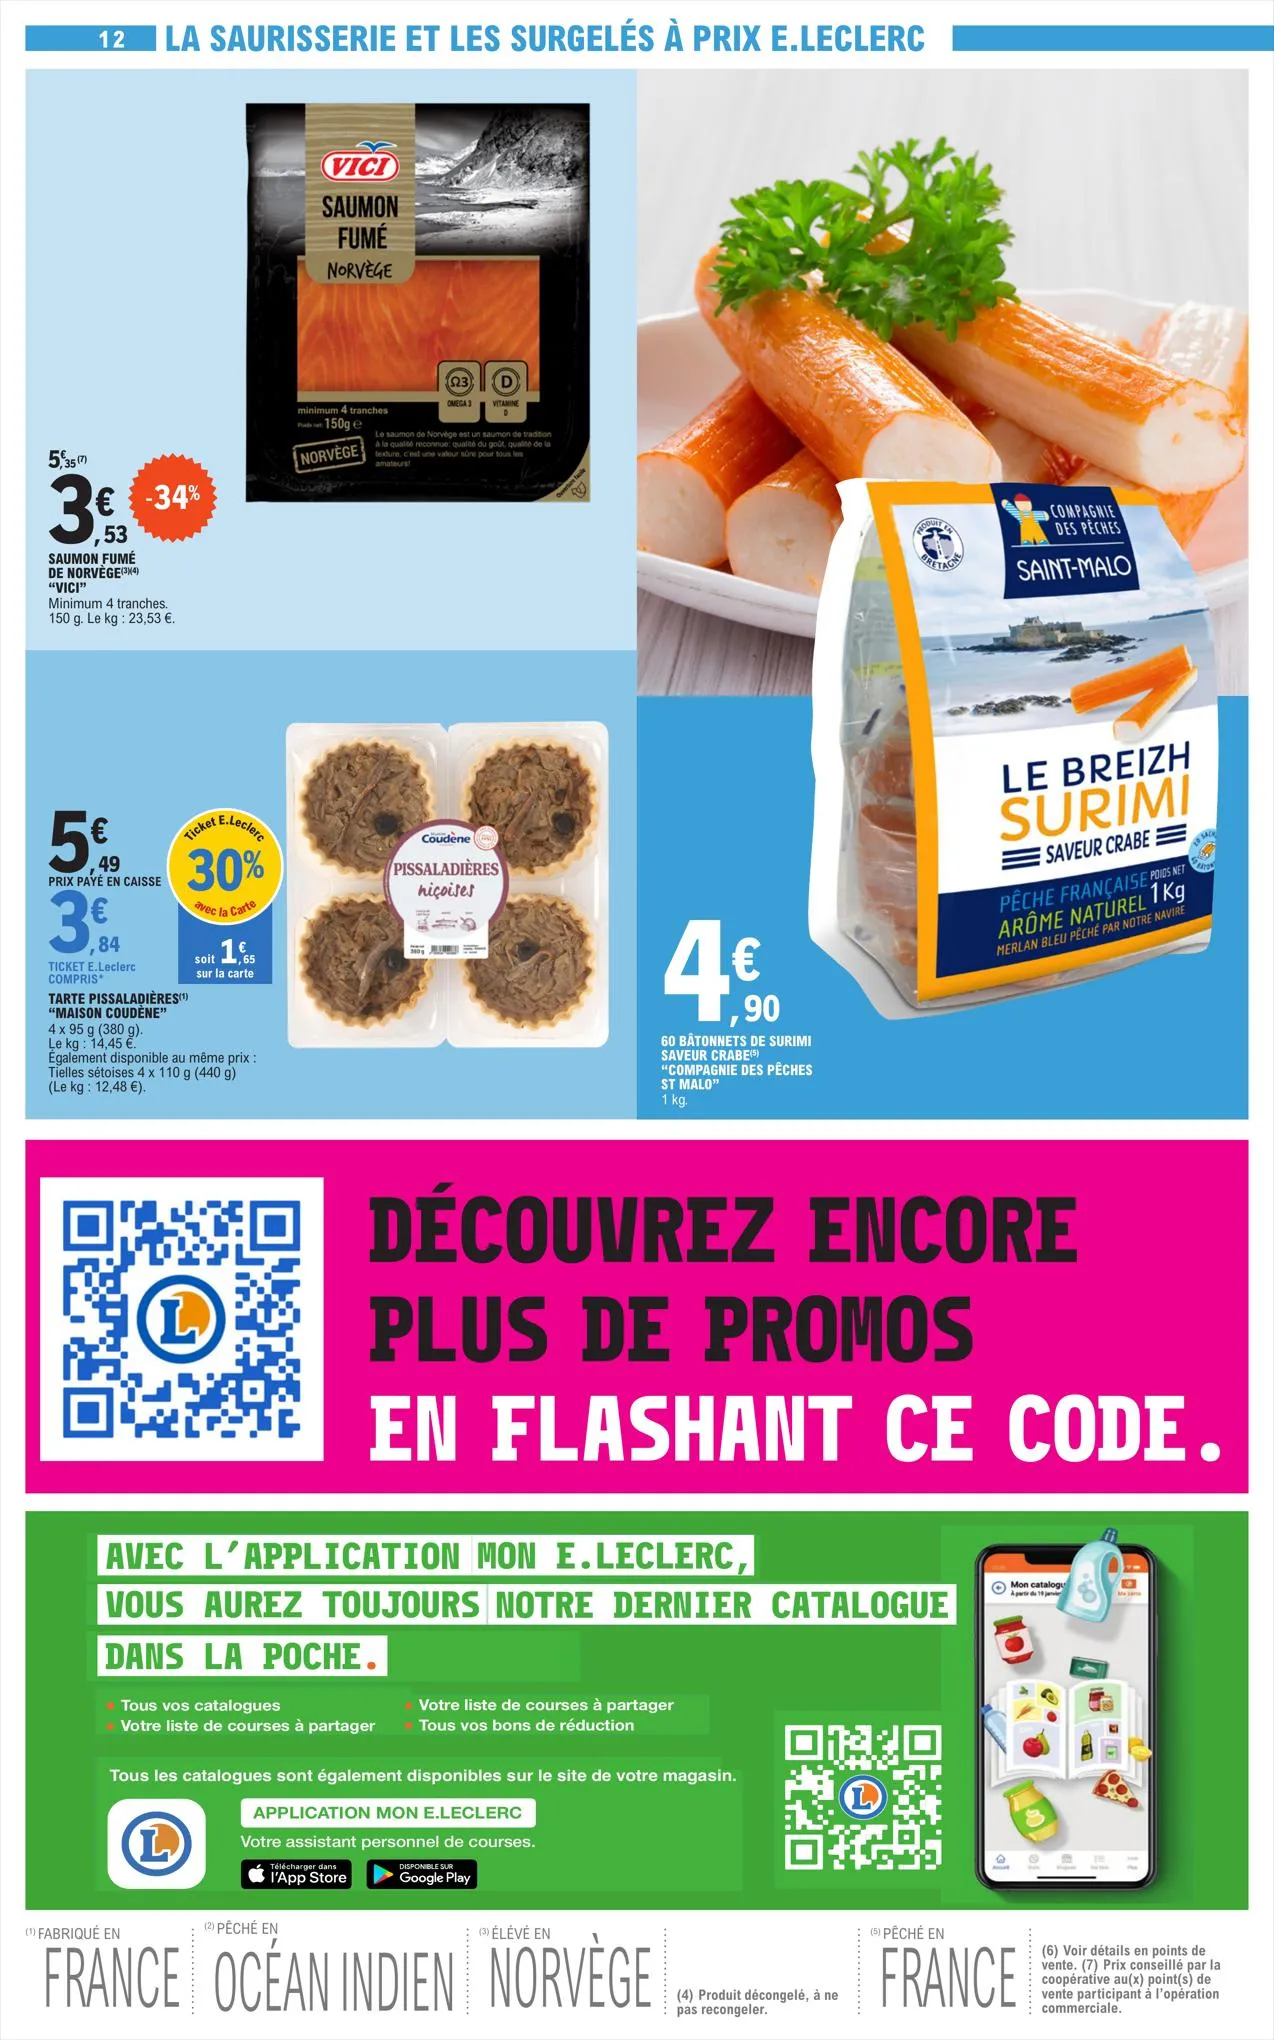 Catalogue Relance Alimentaire 11 - Mixte, page 00012